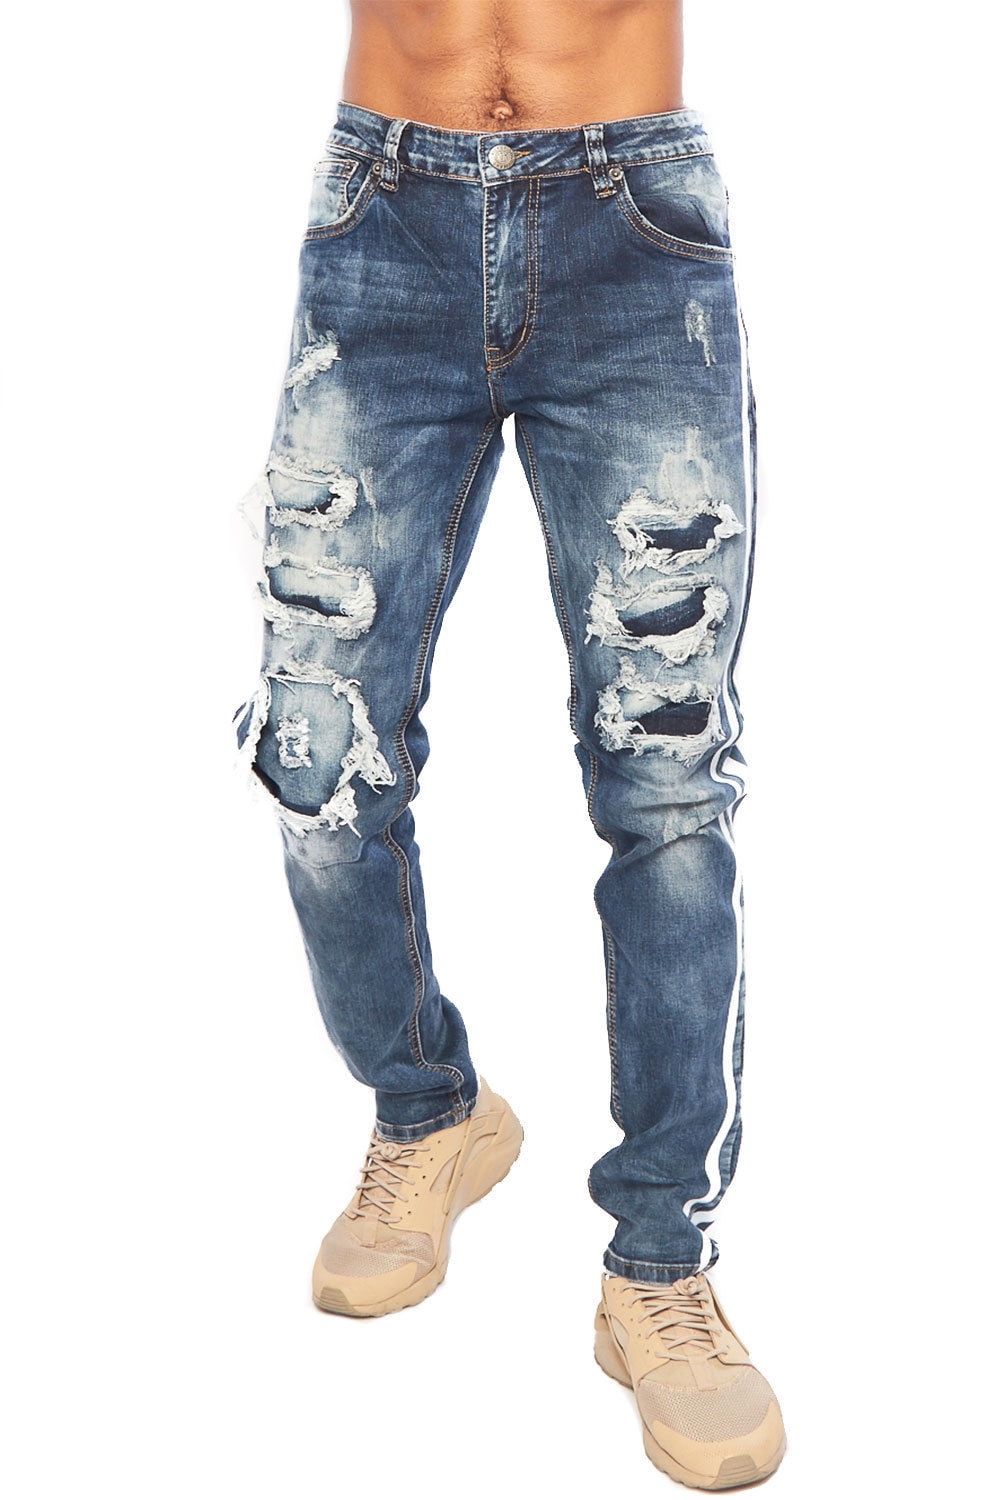 mens jeans with stripe down the side